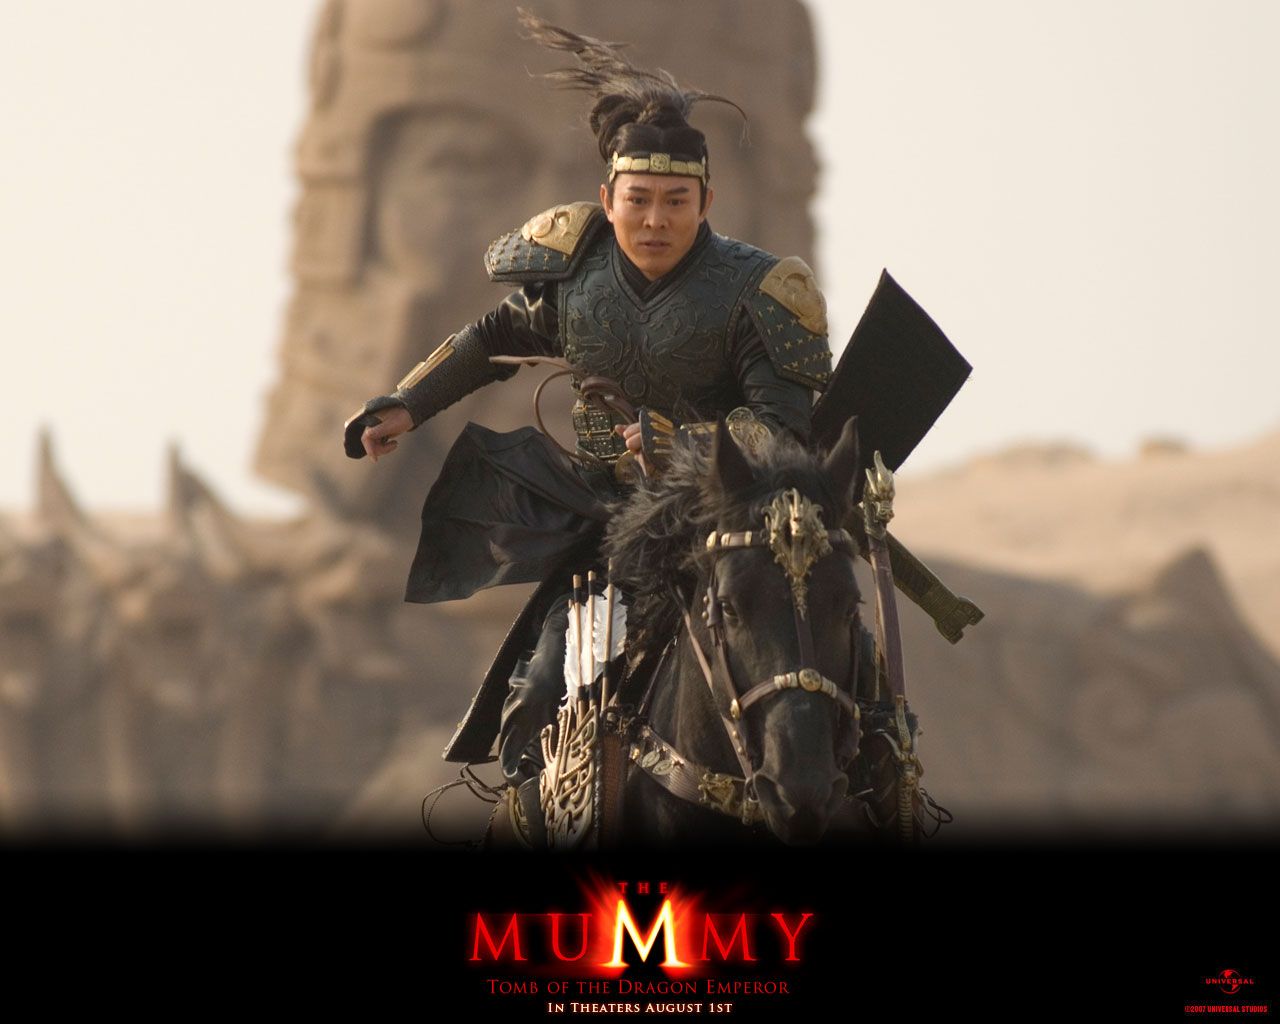 Wallpaper The Mummy The Mummy: Tomb of the Dragon Emperor Movies